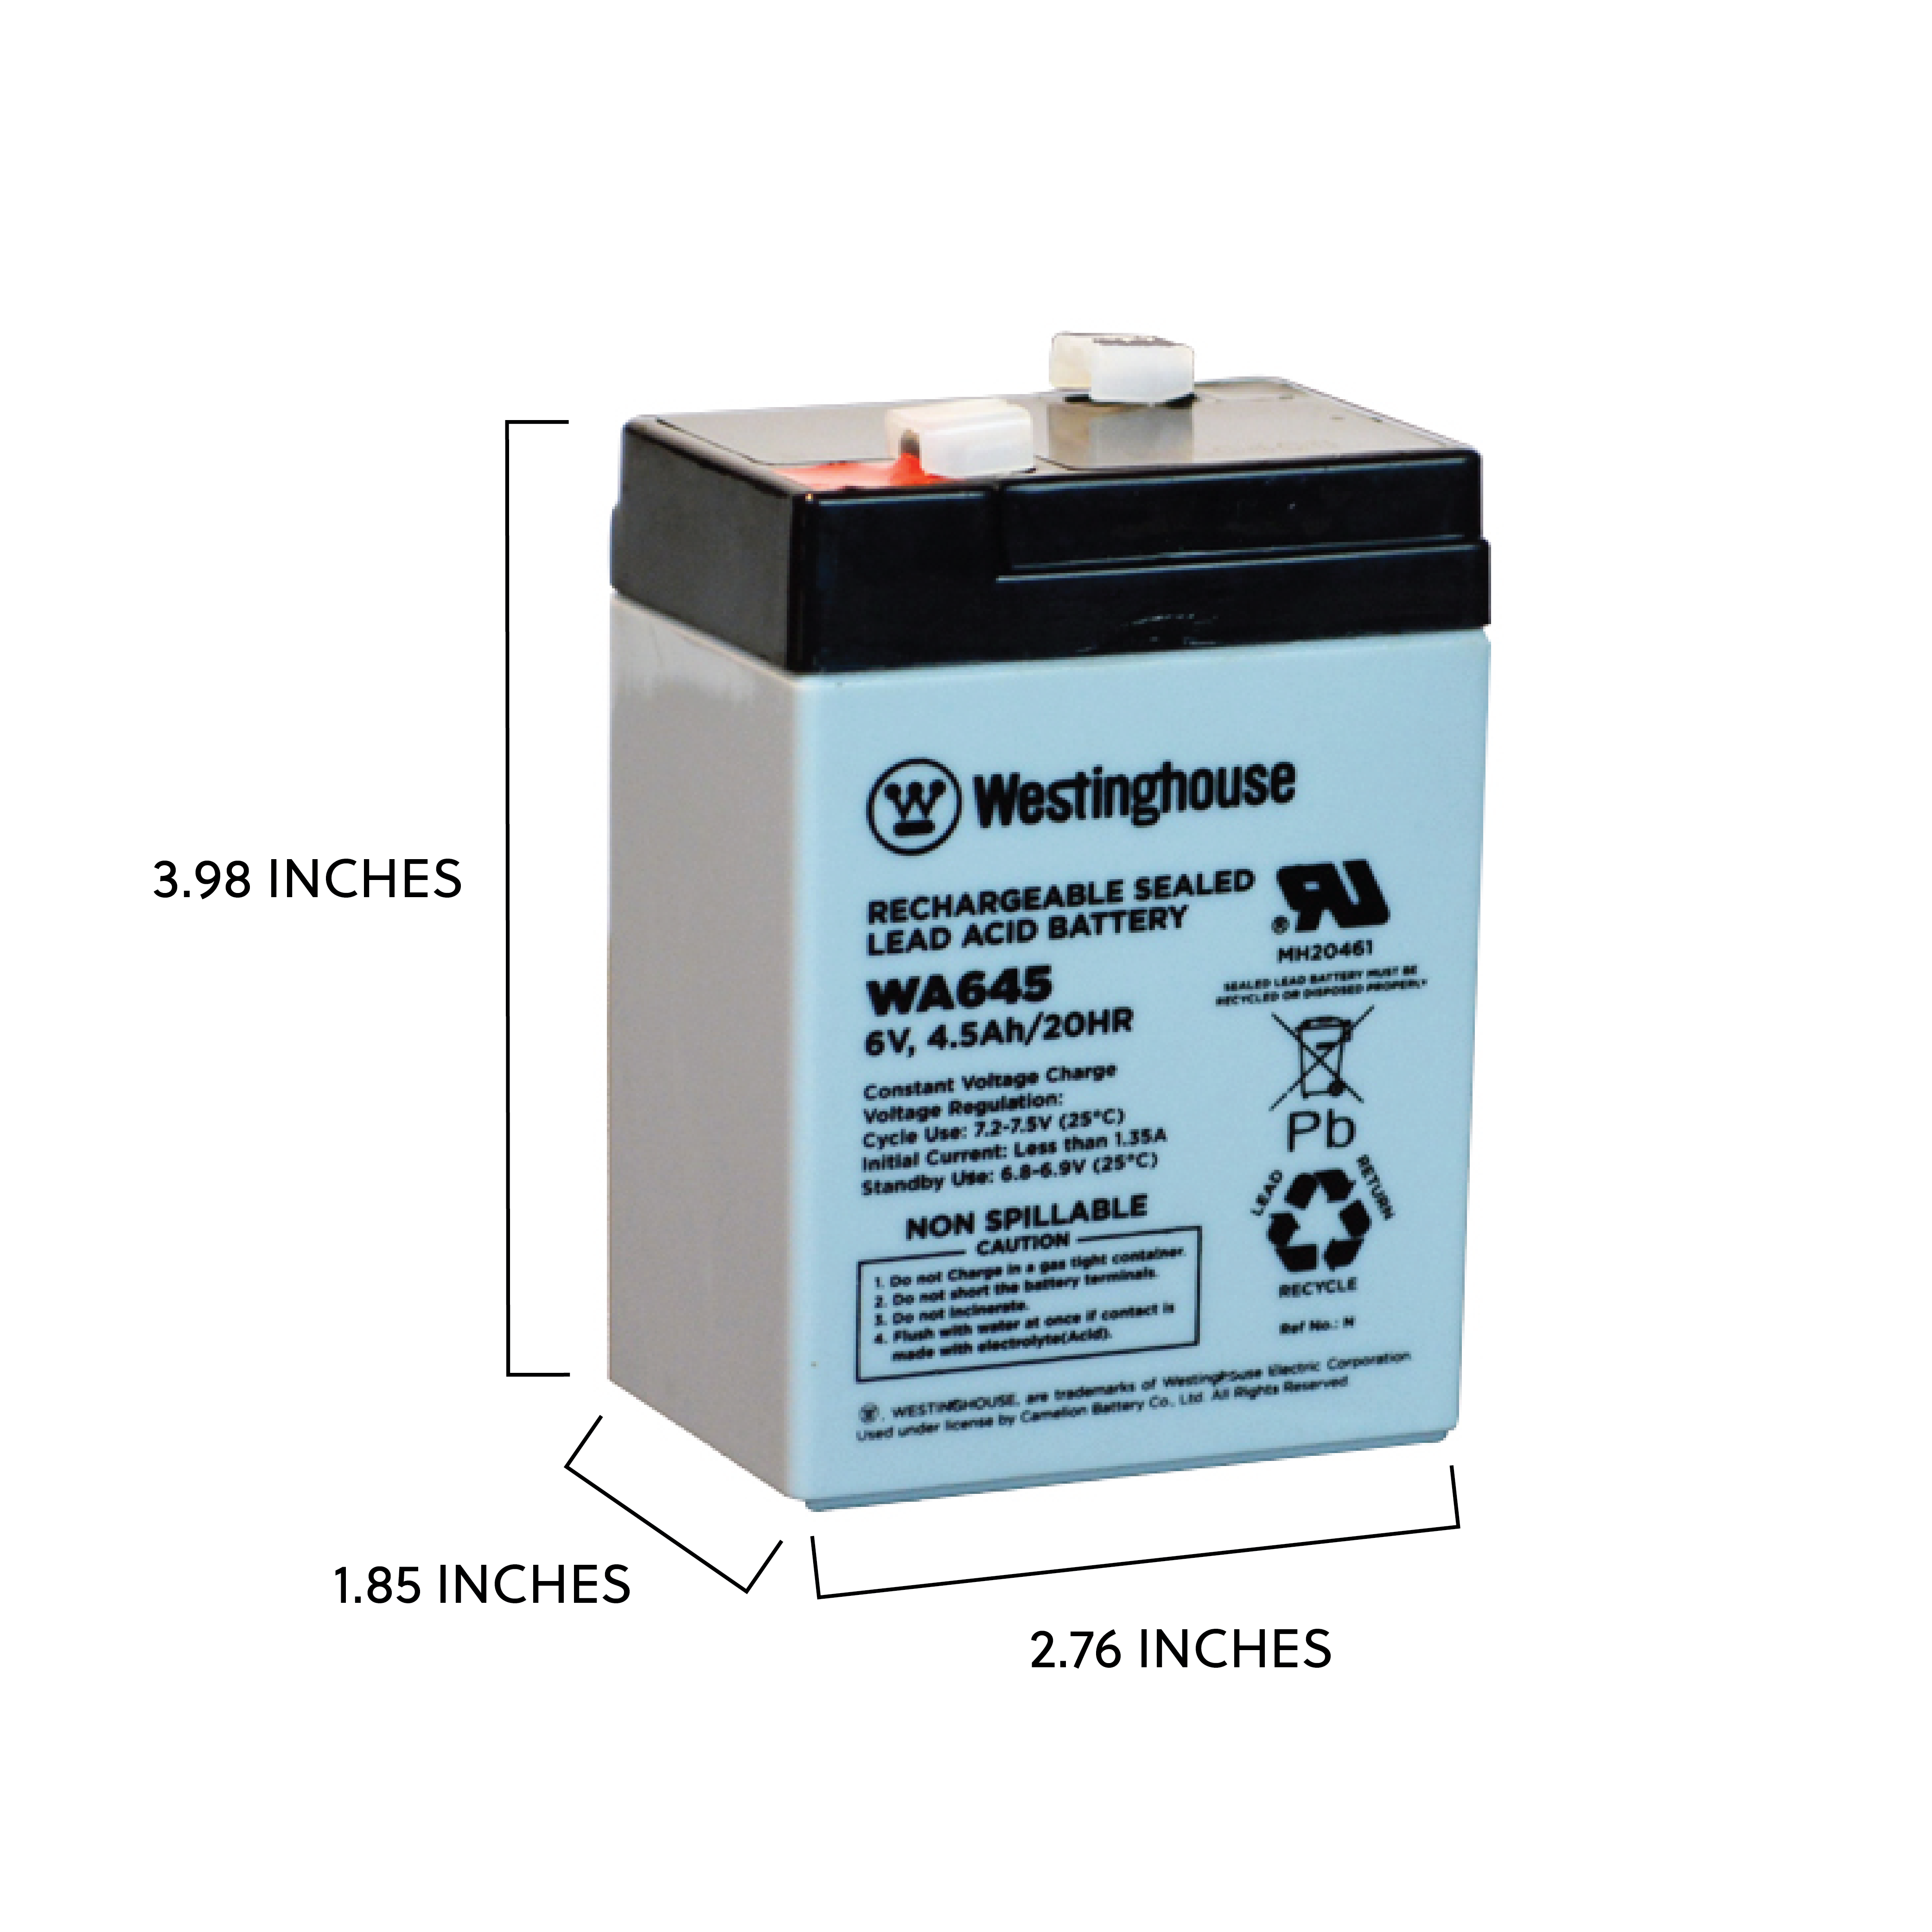 Westinghouse WA645, 6 Volt 4.5Amp F1 Terminal, Sealed Lead Acid Rechargeable Battery